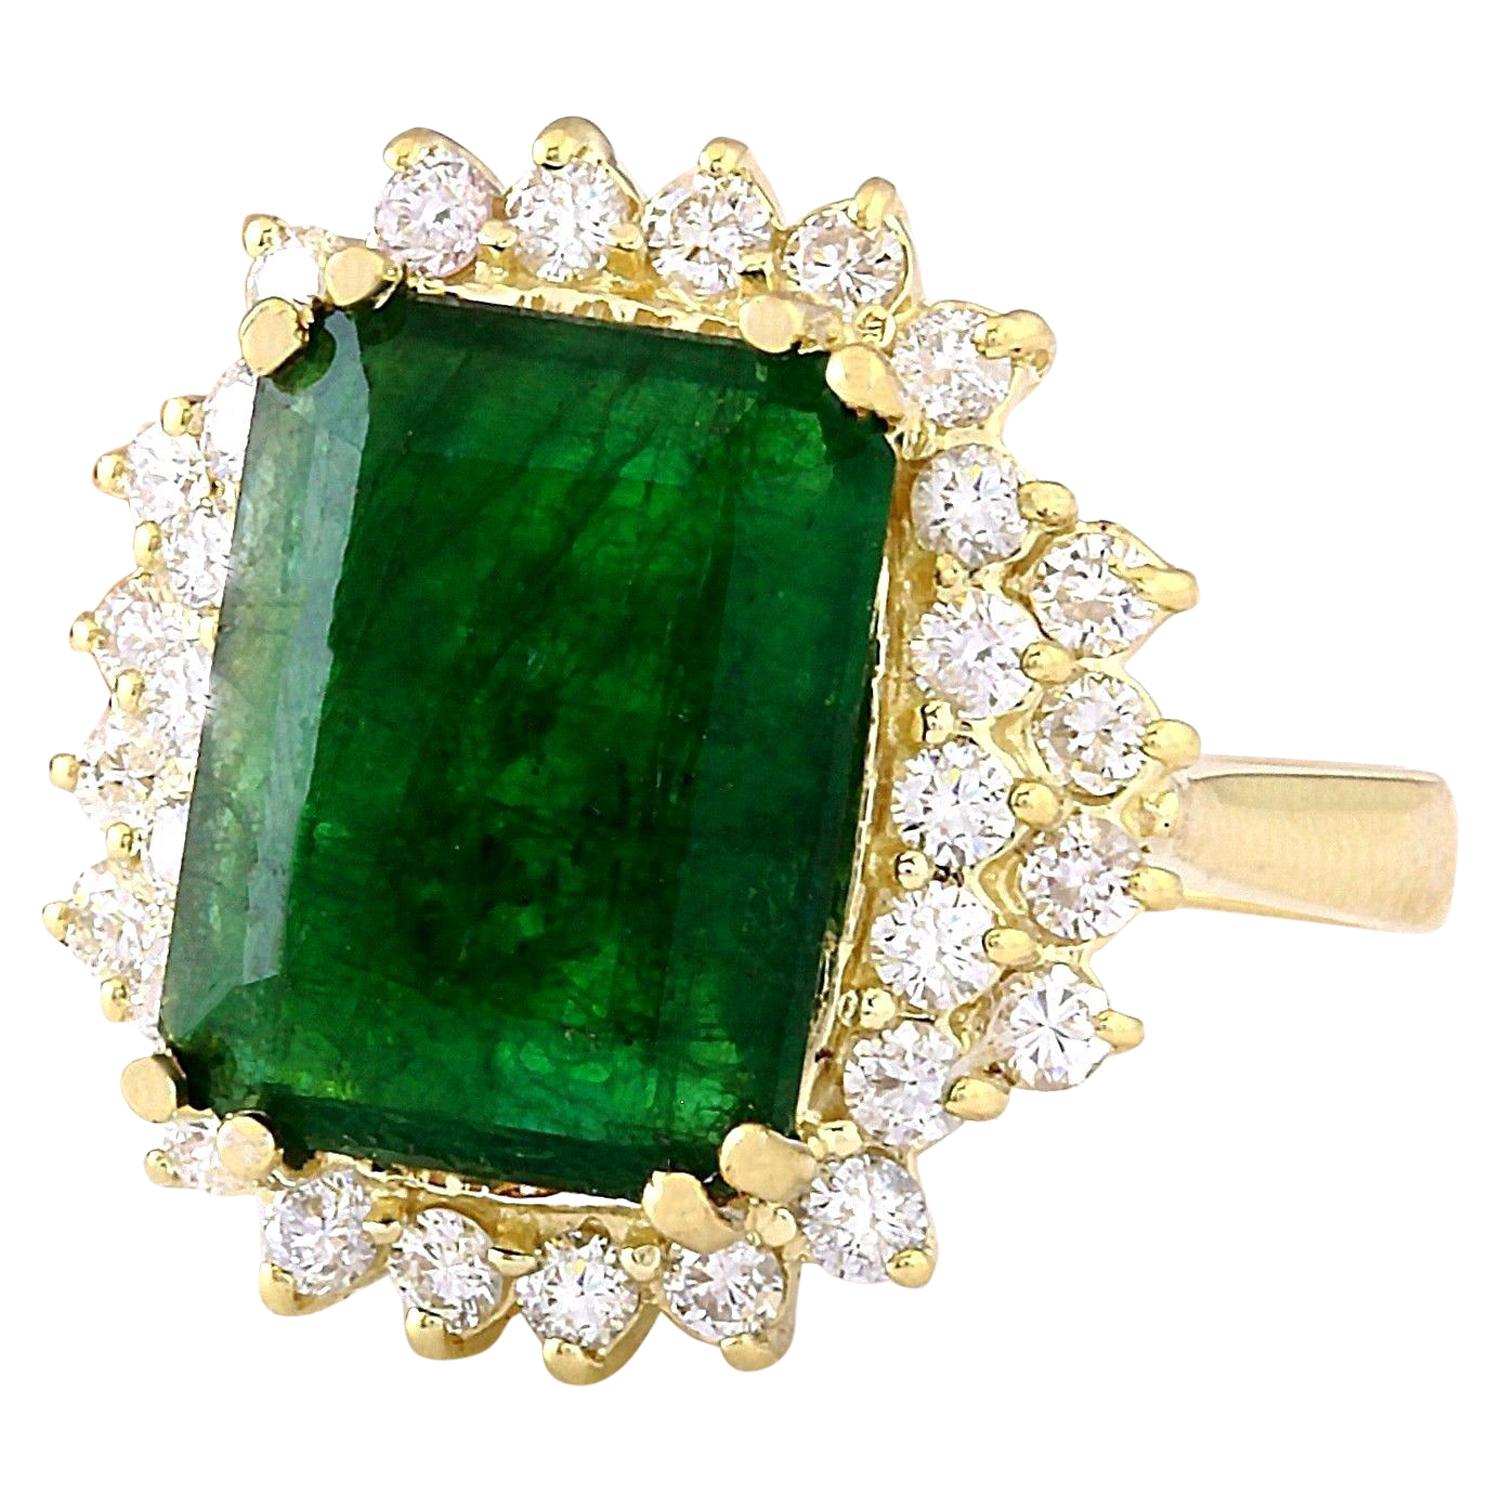 6.60 Carat Natural Emerald 14K Solid Yellow Gold Diamond Ring
 Item Type: Ring
 Item Style: Cocktail
 Material: 14K Yellow Gold
 Mainstone: Emerald
 Stone Color: Green
 Stone Weight: 5.60 Carat
 Stone Shape: Emerald
 Stone Quantity: 1
 Stone